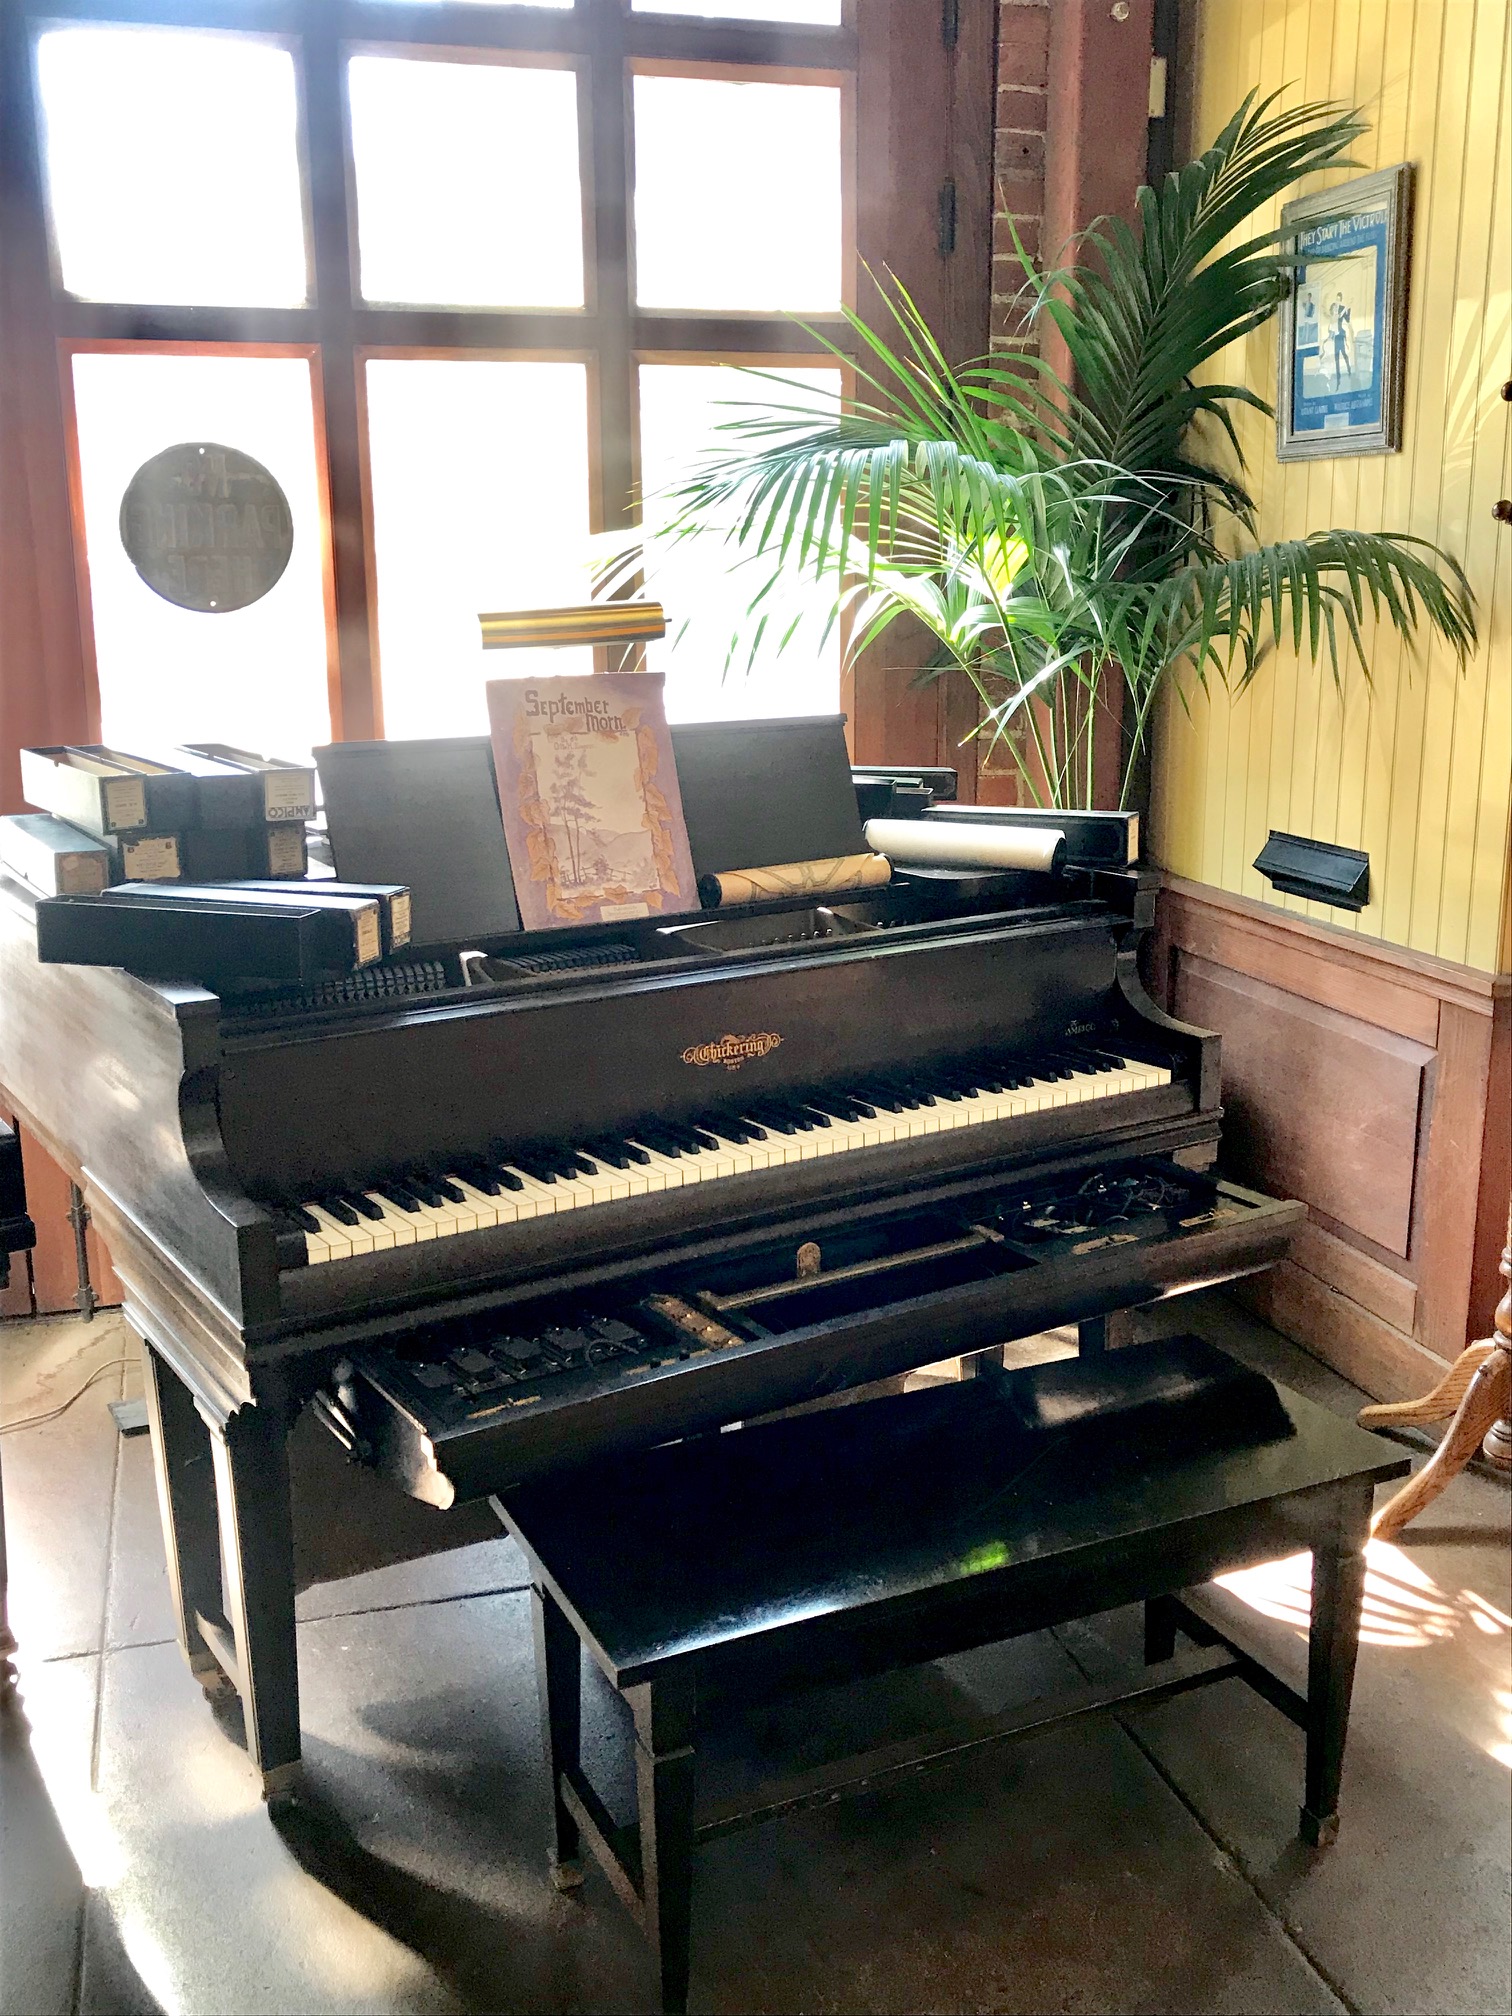 A player piano at Orchestria Palm Court.